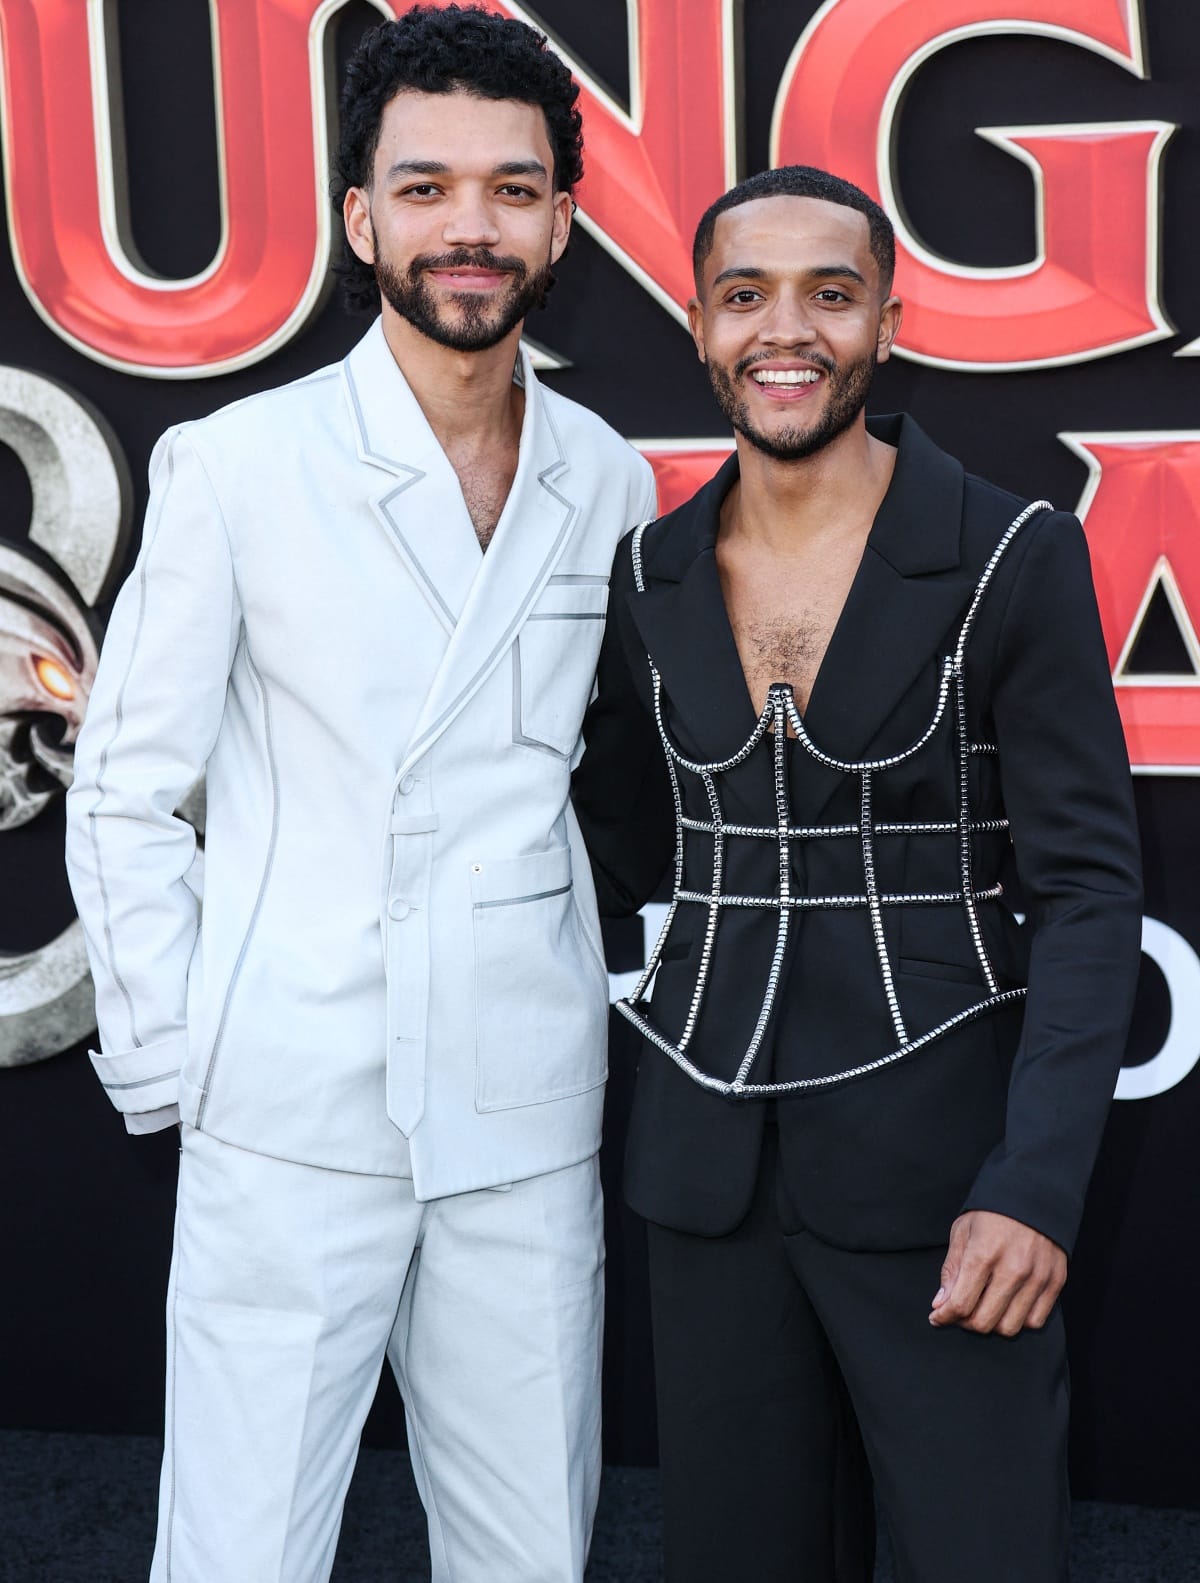 Justice Smith with boyfriend Nicholas L. Ashe at the premiere of Dungeons & Dragons: Honor Among Thieves in Los Angeles